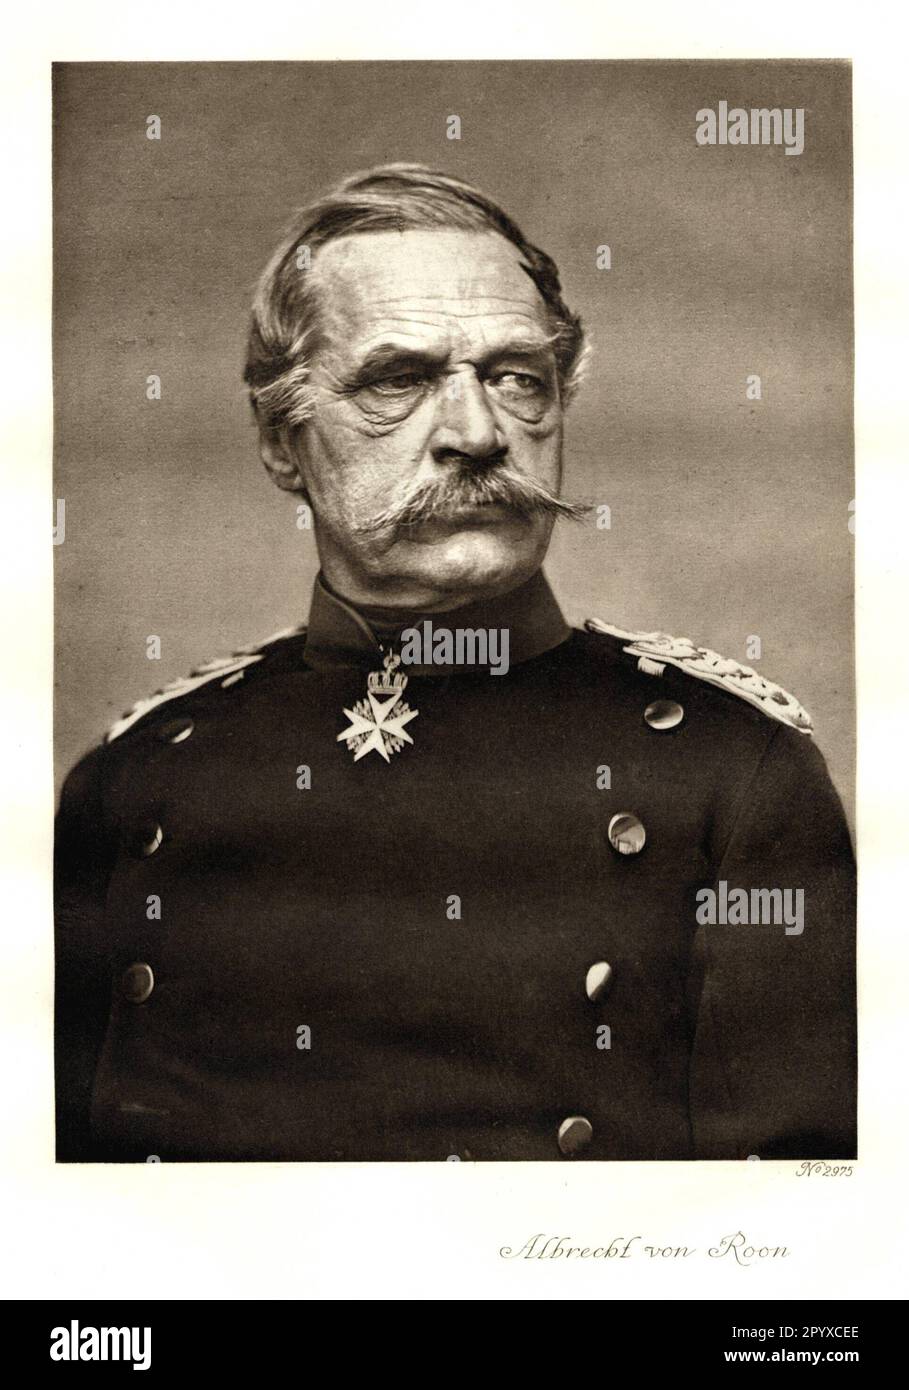 Albrecht Count (since 1871) von Roon (1803-1879), Prussian field marshal general (1873). Roon held various ministerial posts since 1859, such as that of Minister of War. The picture shows von Roon in the Prussian uniform with the cross of the Order Pour le mérite with crown. Photograph. Photo: Heliogravure, Corpus Imaginum, Hanfstaengl Collection. [automated translation] Stock Photo